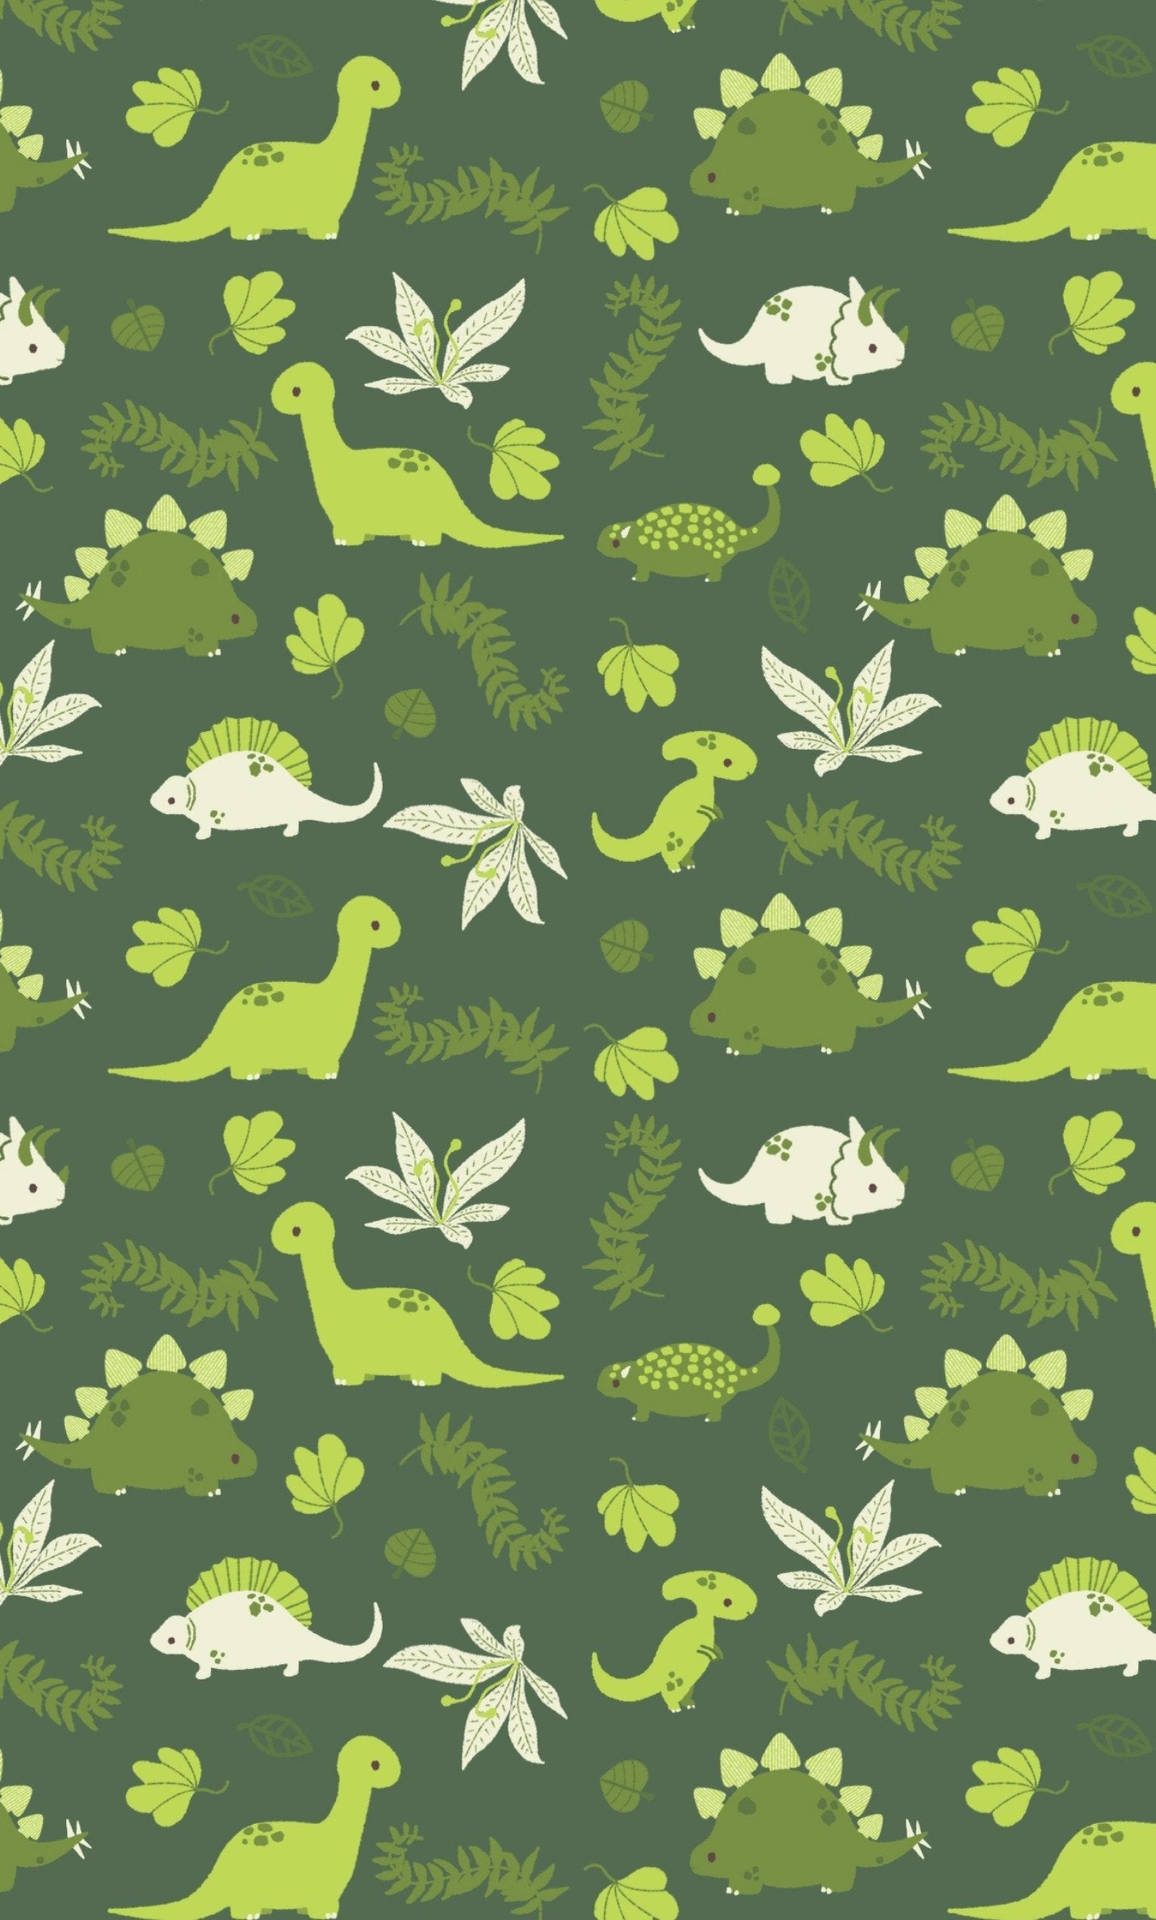 Show off your style with this dinosaur print iPhone case! Wallpaper